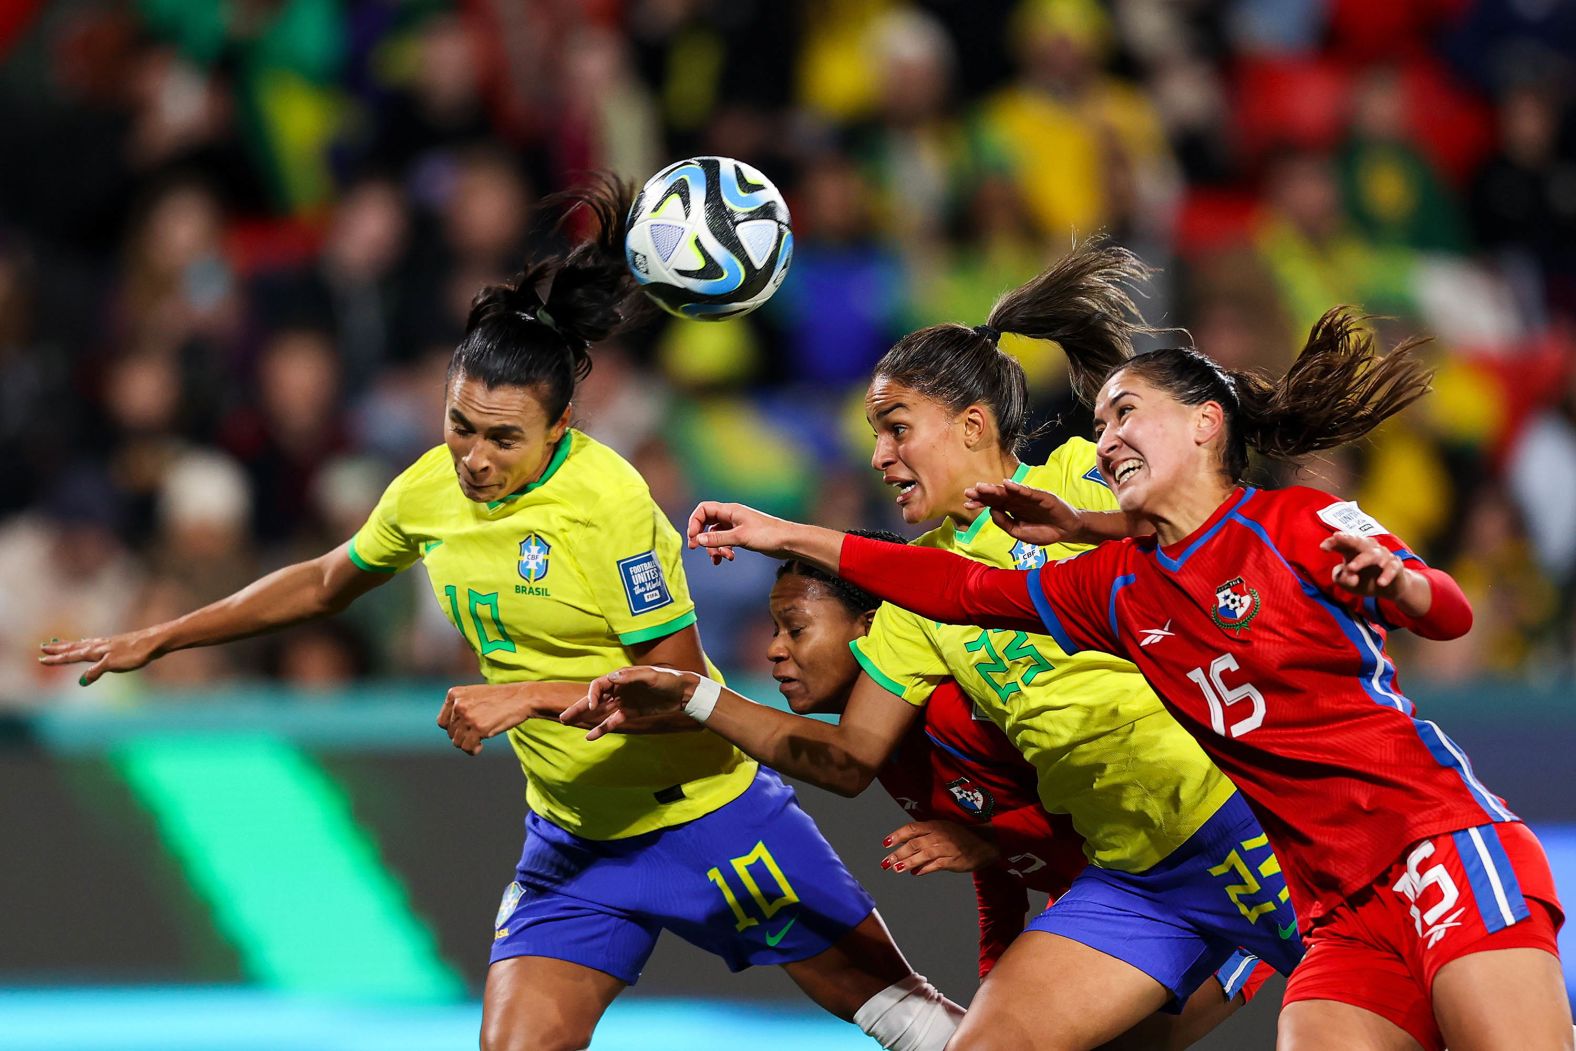 Brazil's Marta, left, heads the ball during a match against Panama on July 24. <a href="index.php?page=&url=https%3A%2F%2Fedition.cnn.com%2F2023%2F07%2F23%2Ffootball%2Fbrazil-germany-panama-morocco-womens-world-cup-2023-spt-intl%2Findex.html" target="_blank">Brazil won 4-0</a>.